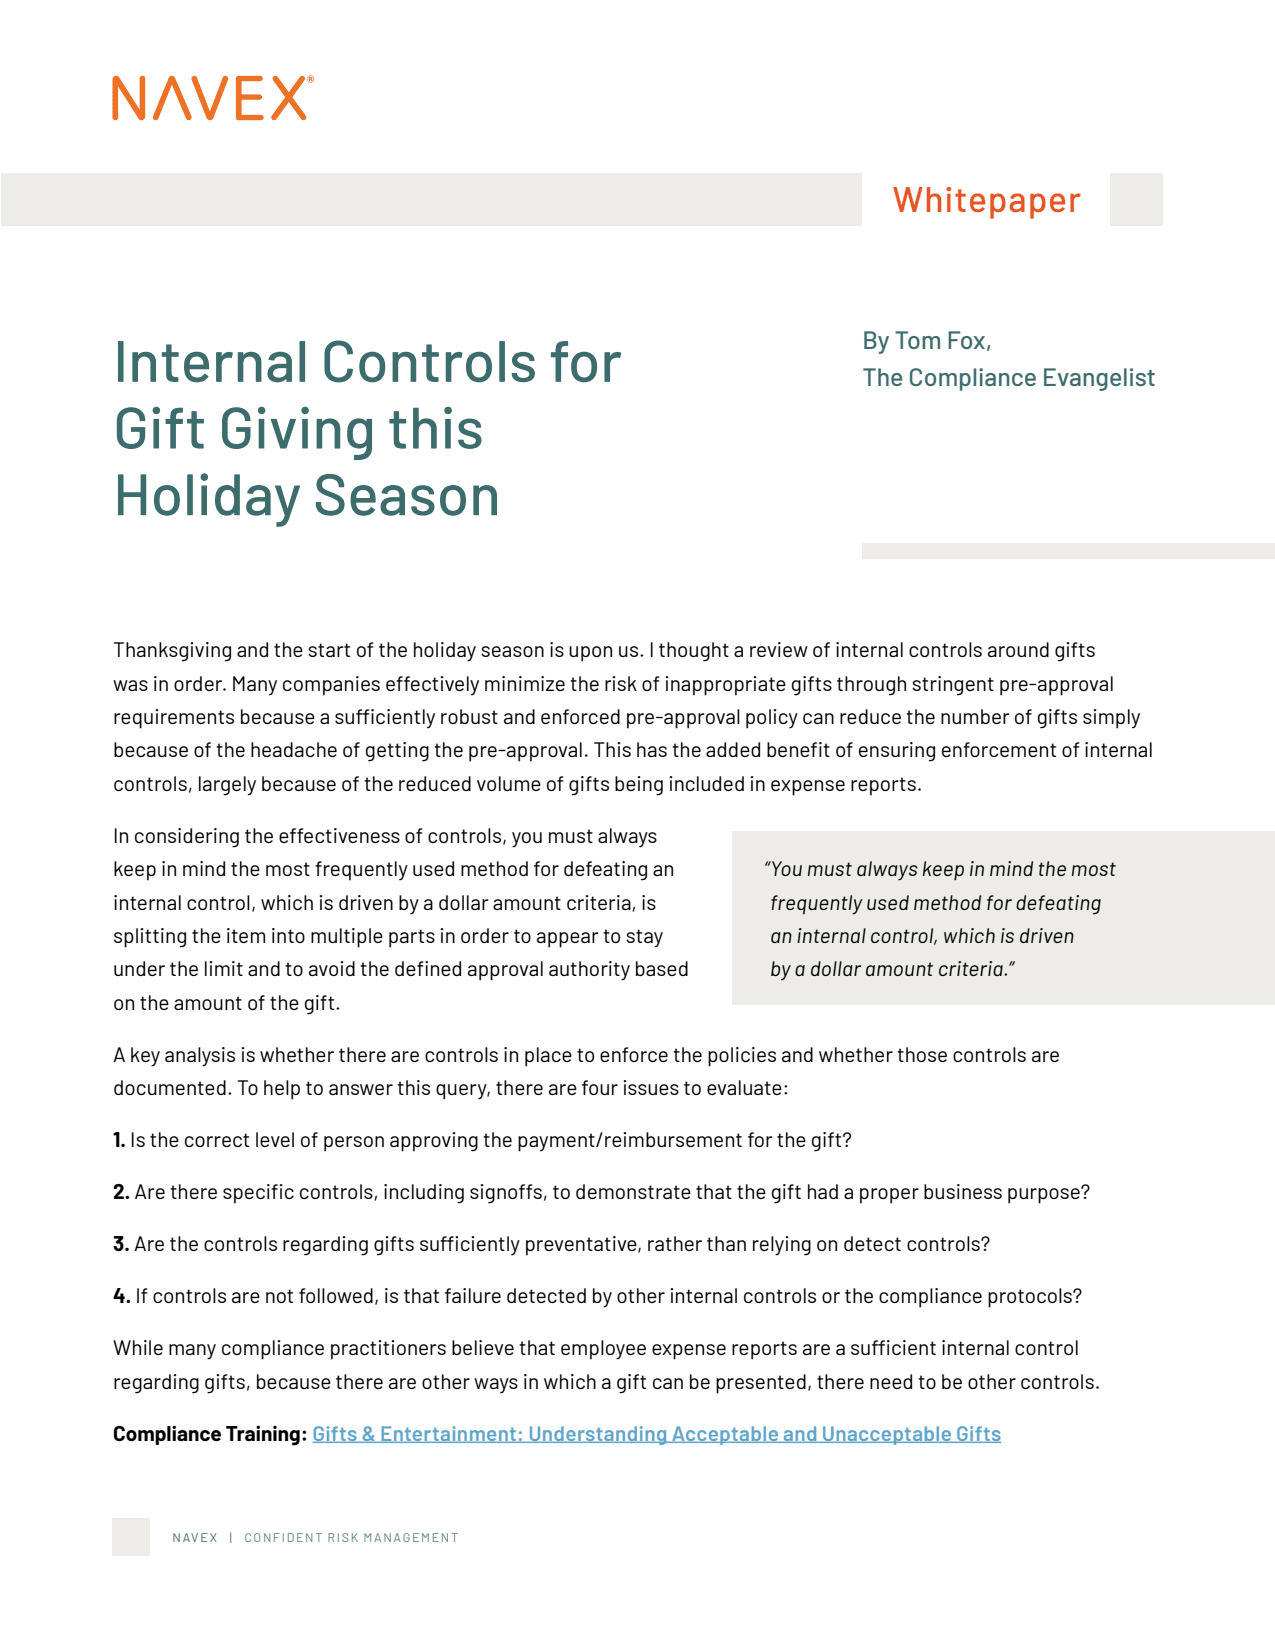 Internal Controls for Gift Giving this Holiday Season Whitepaper